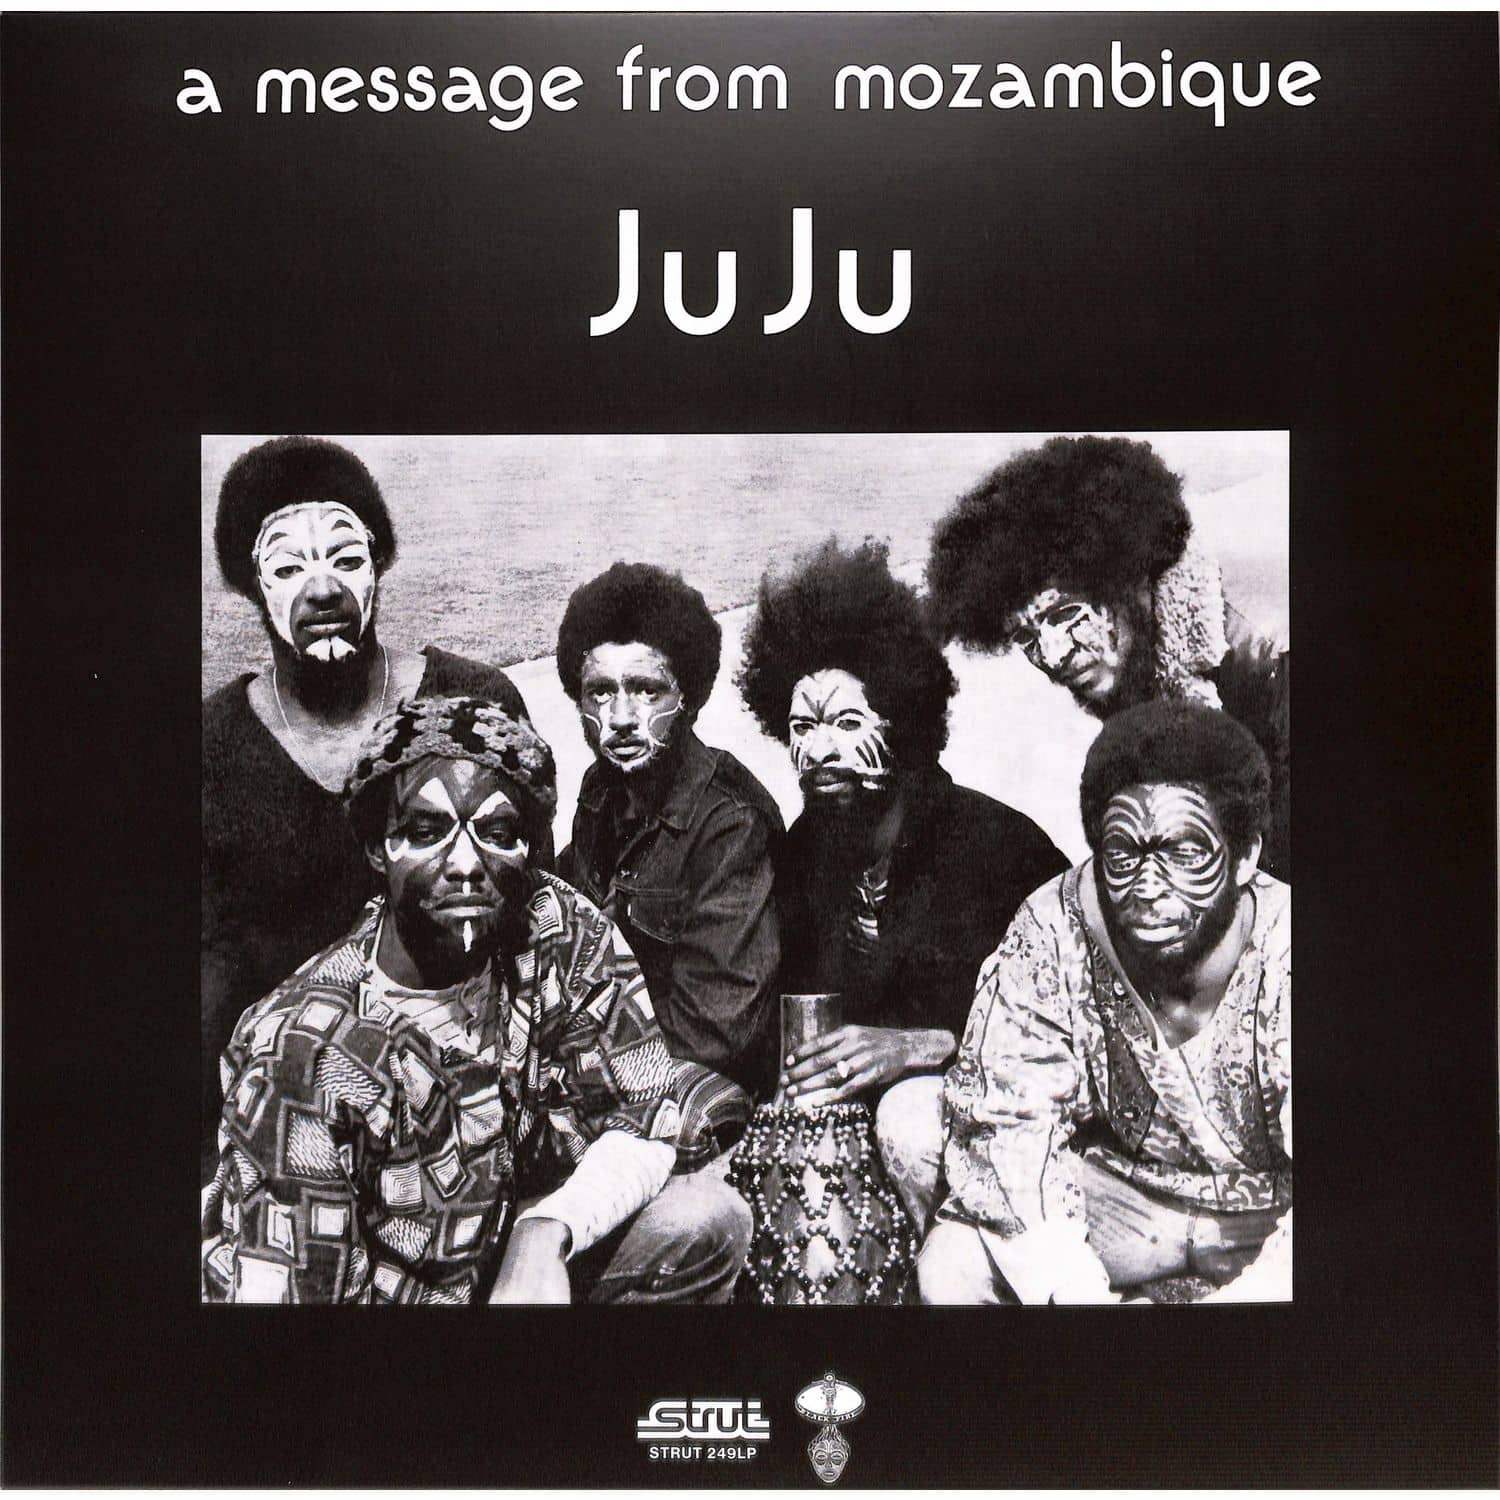 Juju - A MESSAGE FROM MOZAMBIQUE 